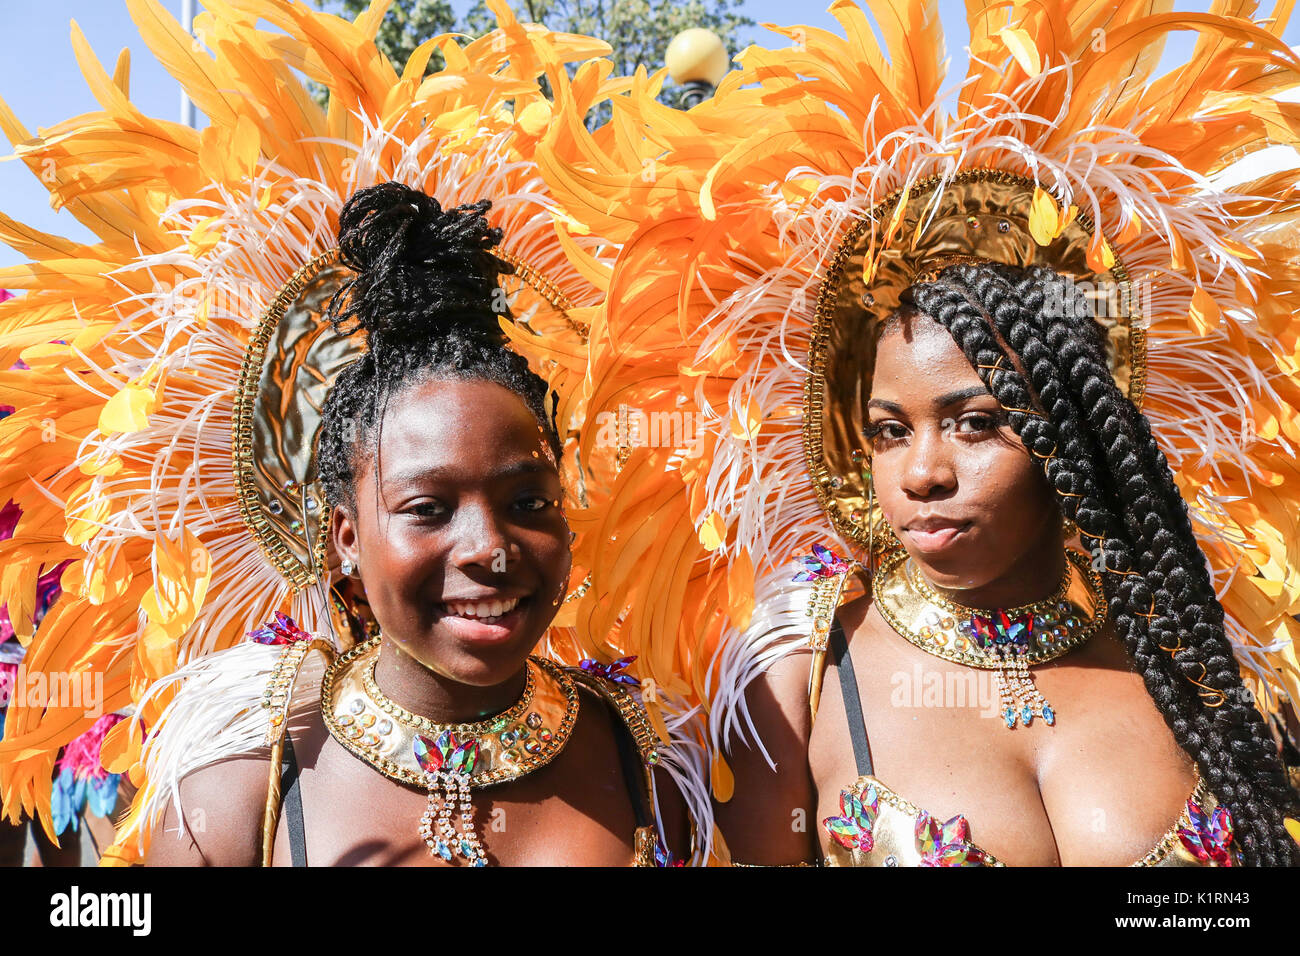 London, UK. 27th Aug, 2017. The Notting Hill Carnival kicked Off with a family day parade with  children dressed in colorful Samba costumes. The Notting Hill carnival which celebrates Afro-Caribbean culture by the British West Indian community is expected to attract 1 million revellers over the August bank holiday Credit: amer ghazzal/Alamy Live News Stock Photo